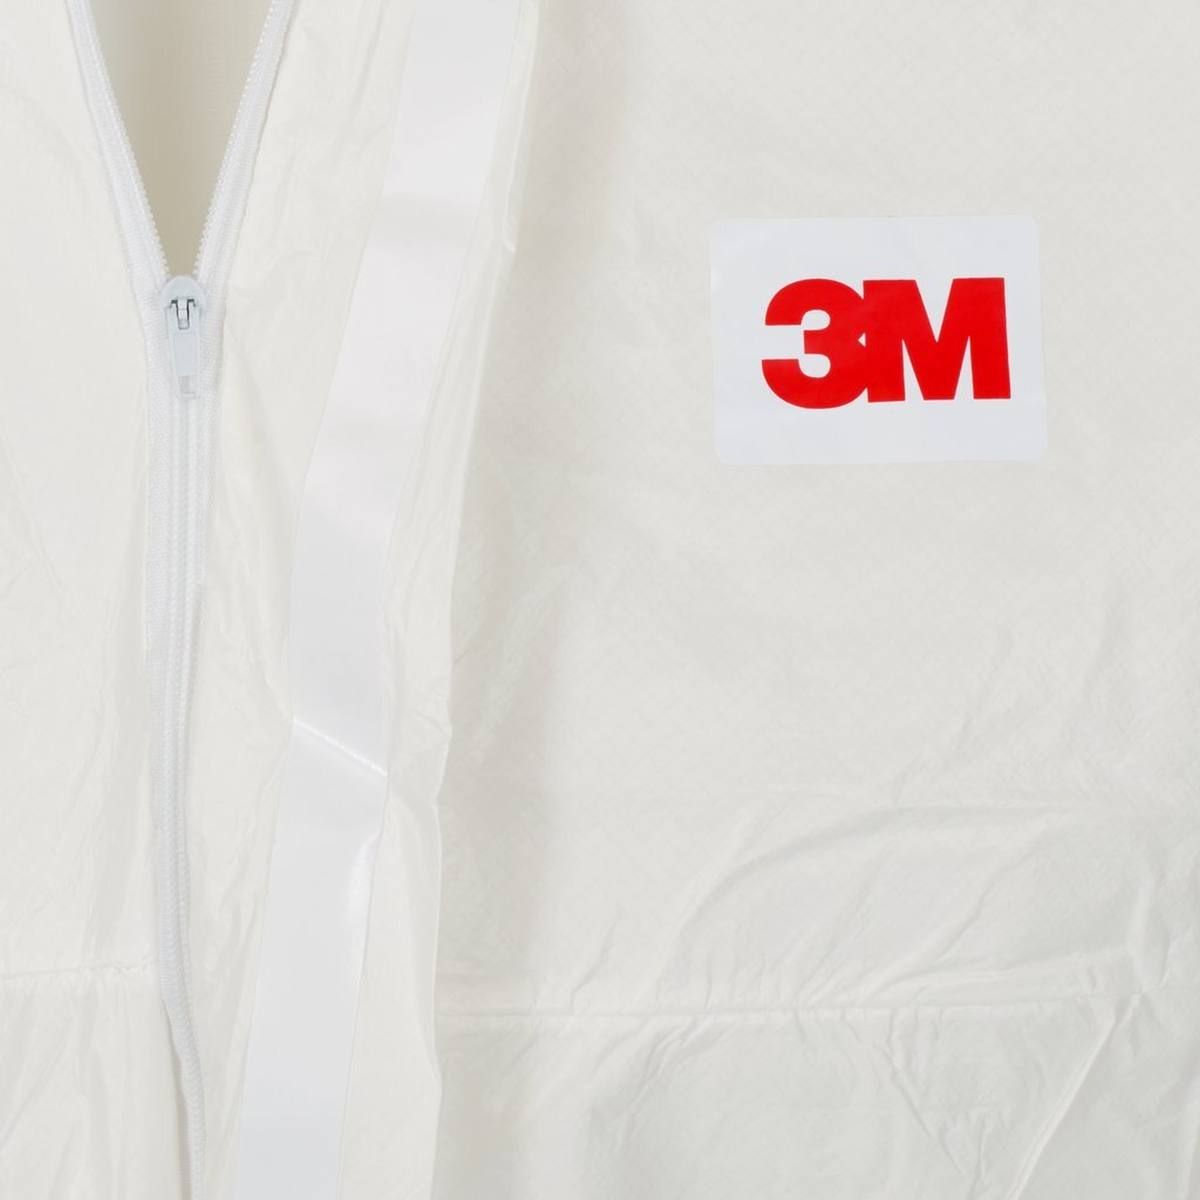 3M 4540 coverall, white blue, type 5/6, size XXL, robust, lint-free, reinforced seams, SMMMS material, breathable, detachable zipper, knitted cuffs